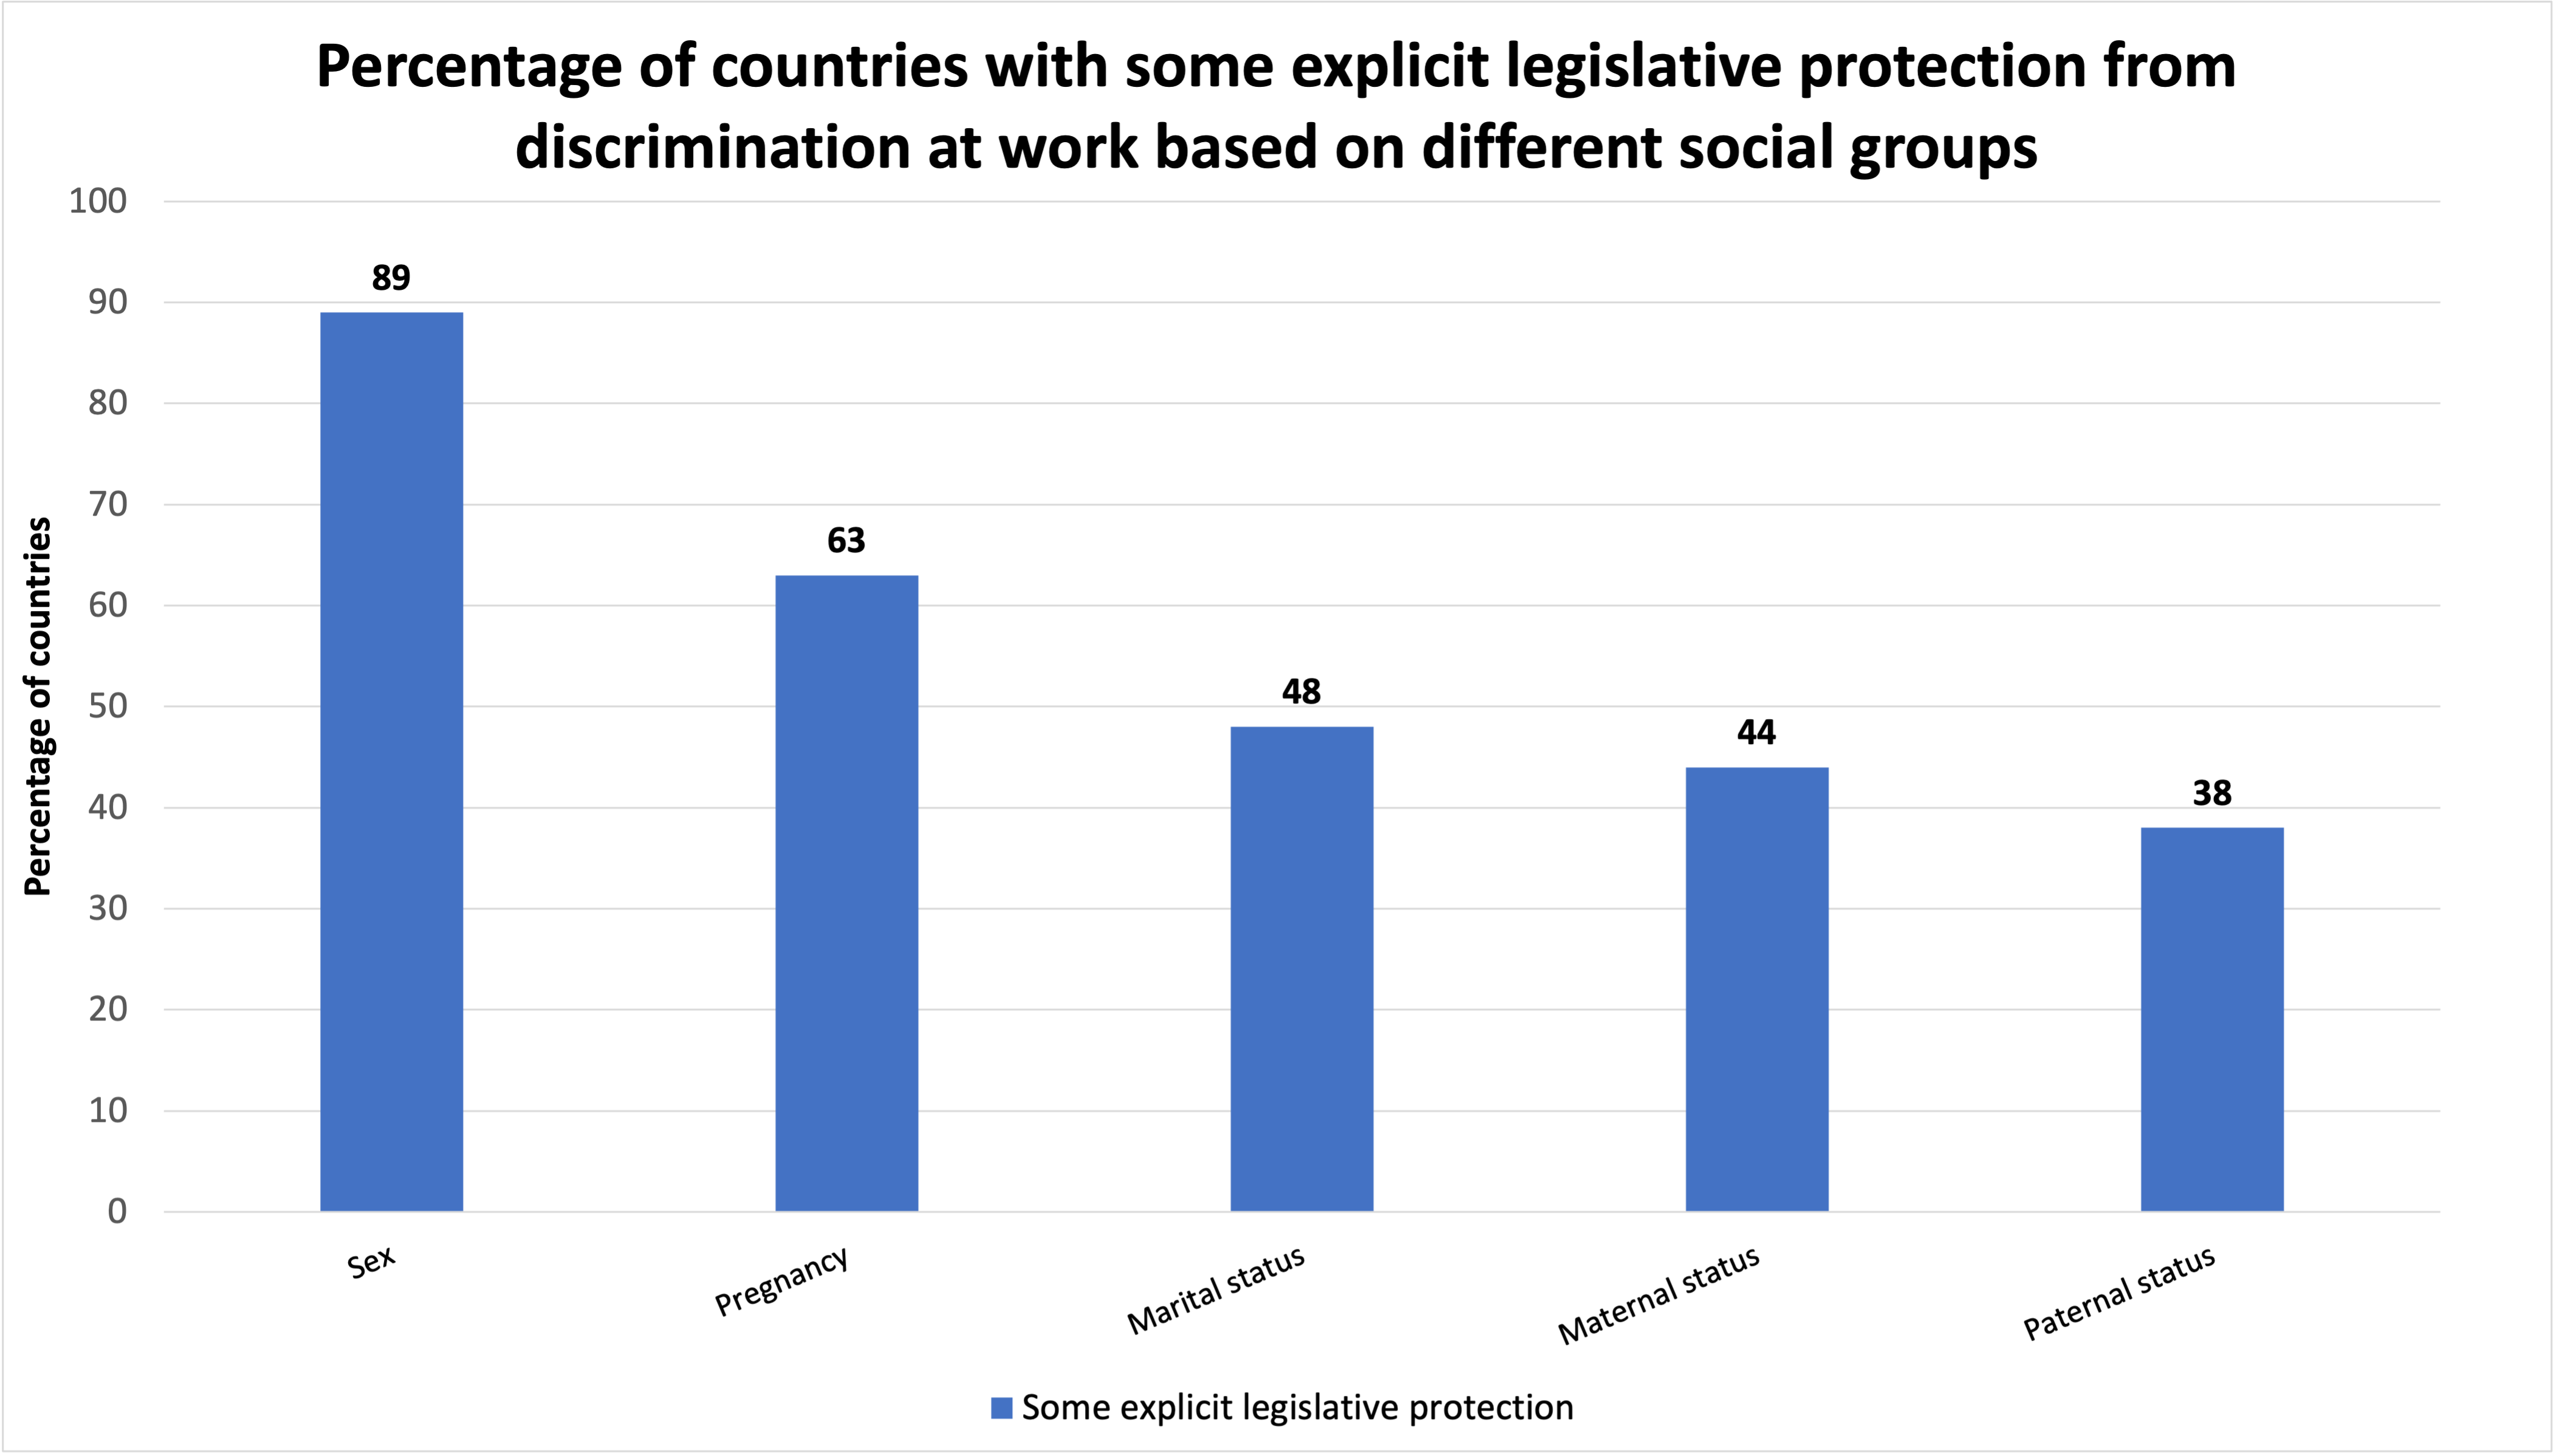 Percentage of countries with some explicit legislative protection from discrimination at work based on different social groups